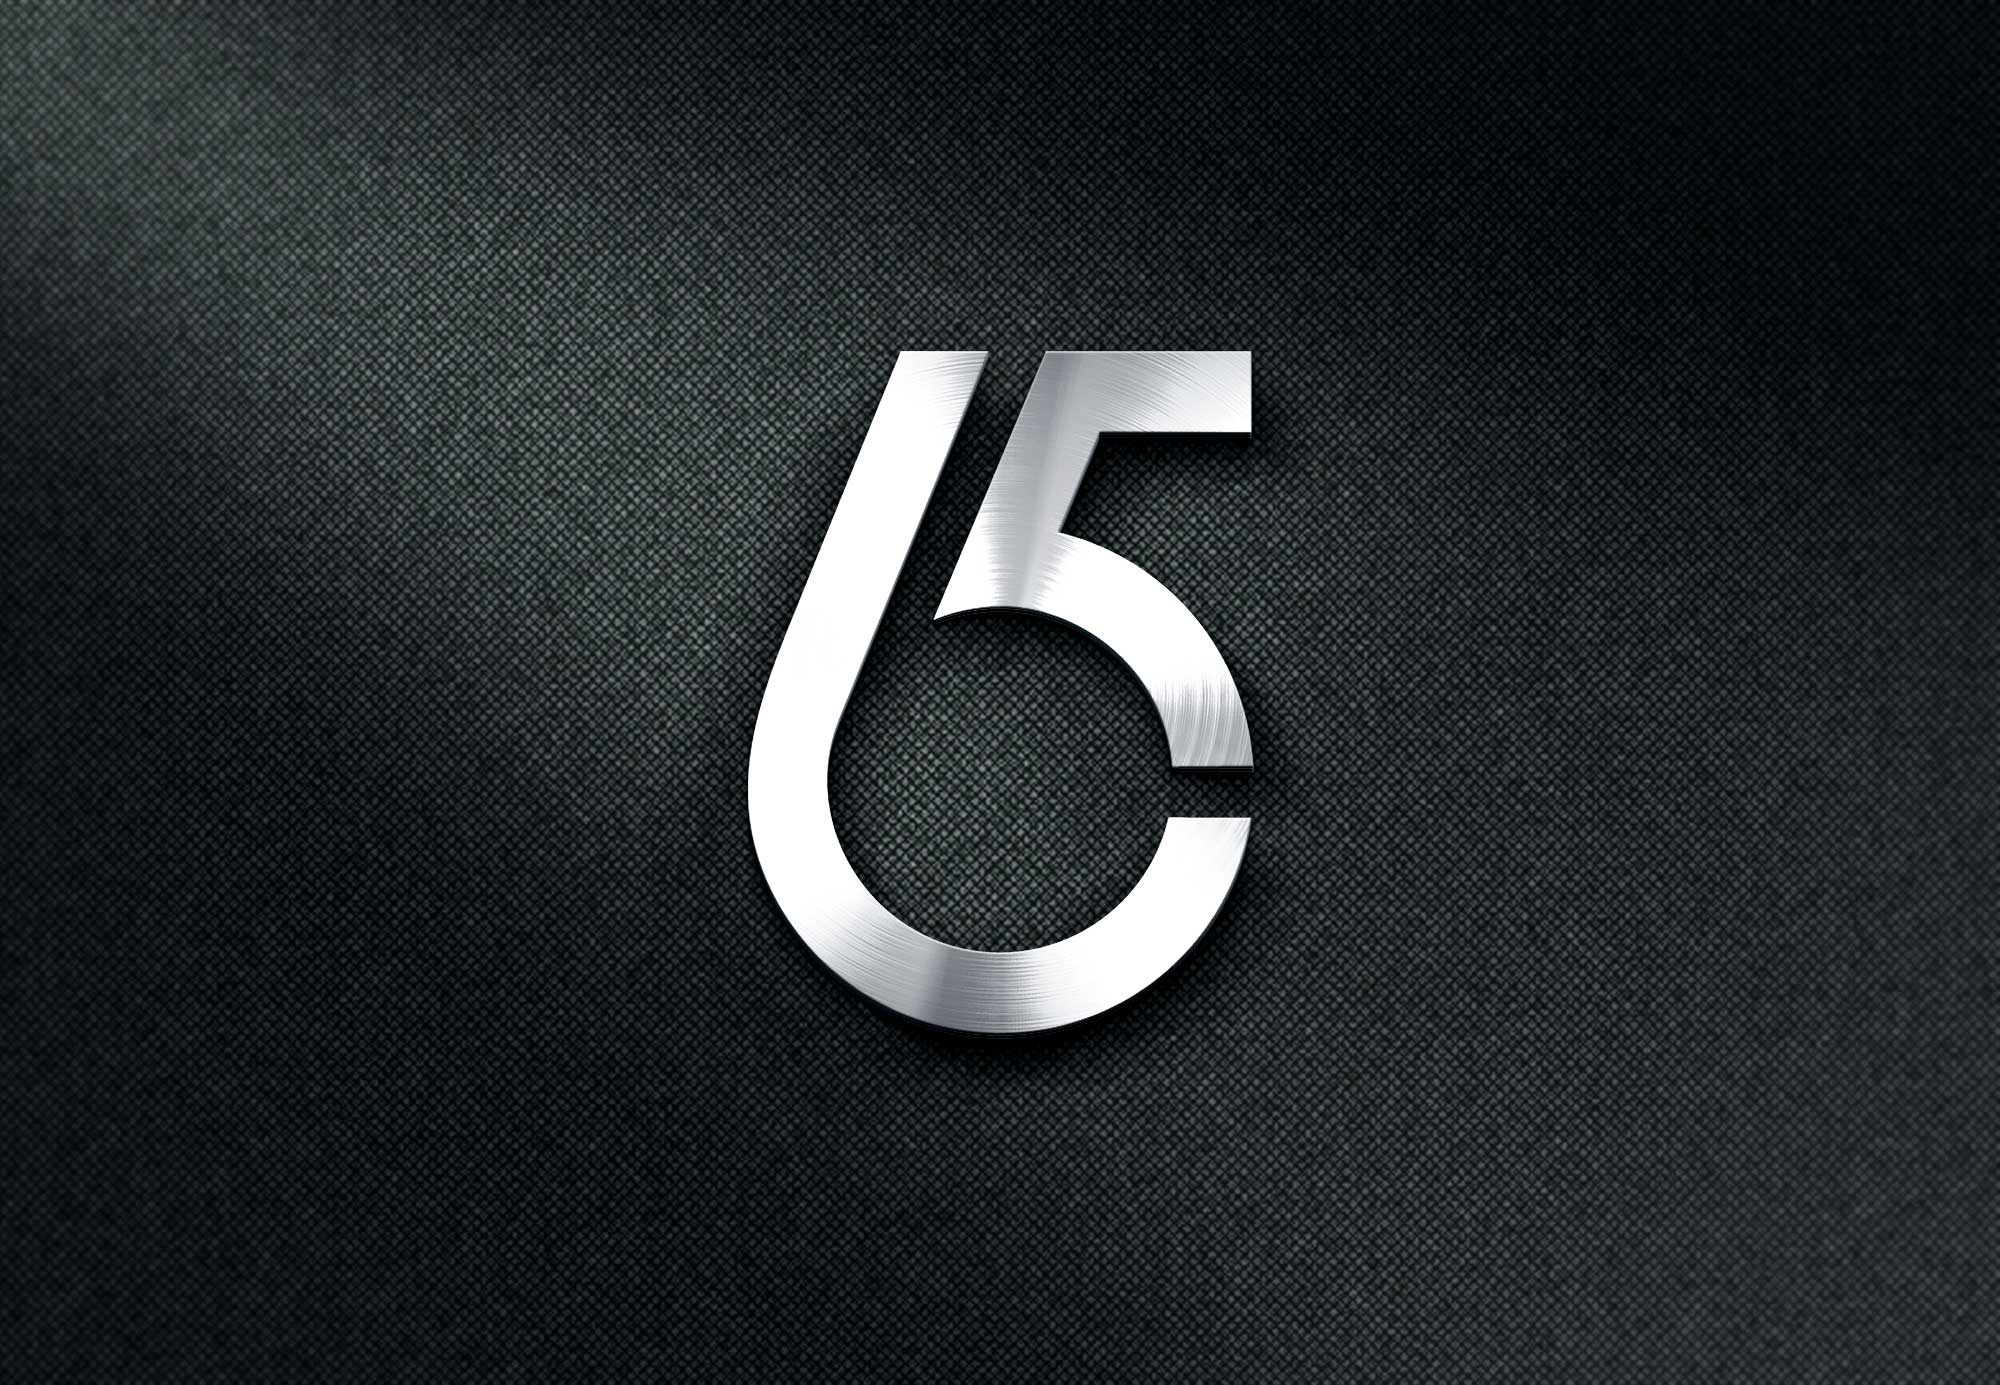 The number five is shown in silver on a black background.